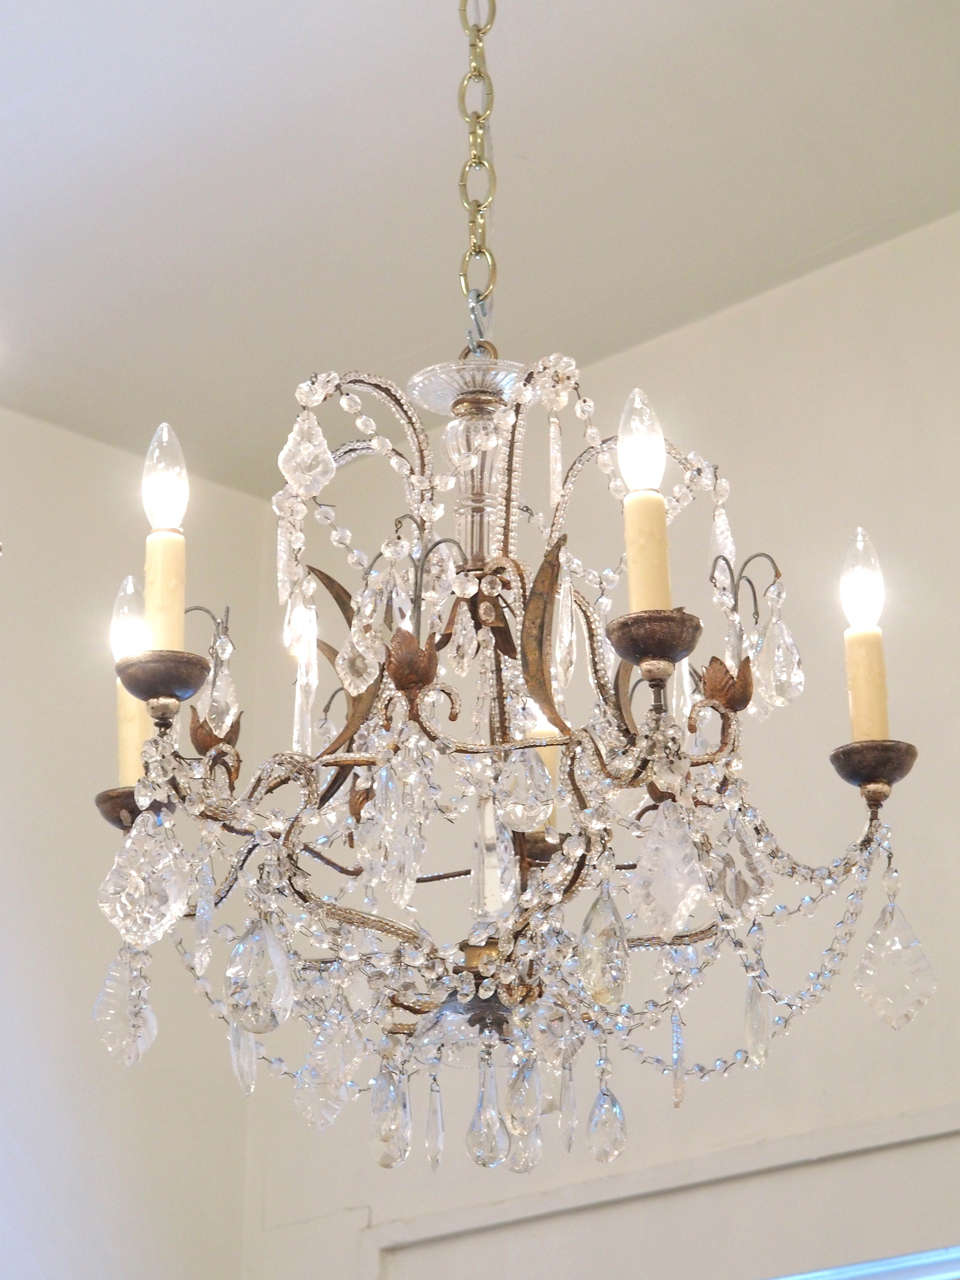 Pair of late 19th century Italian iron and crystal chandeliers.